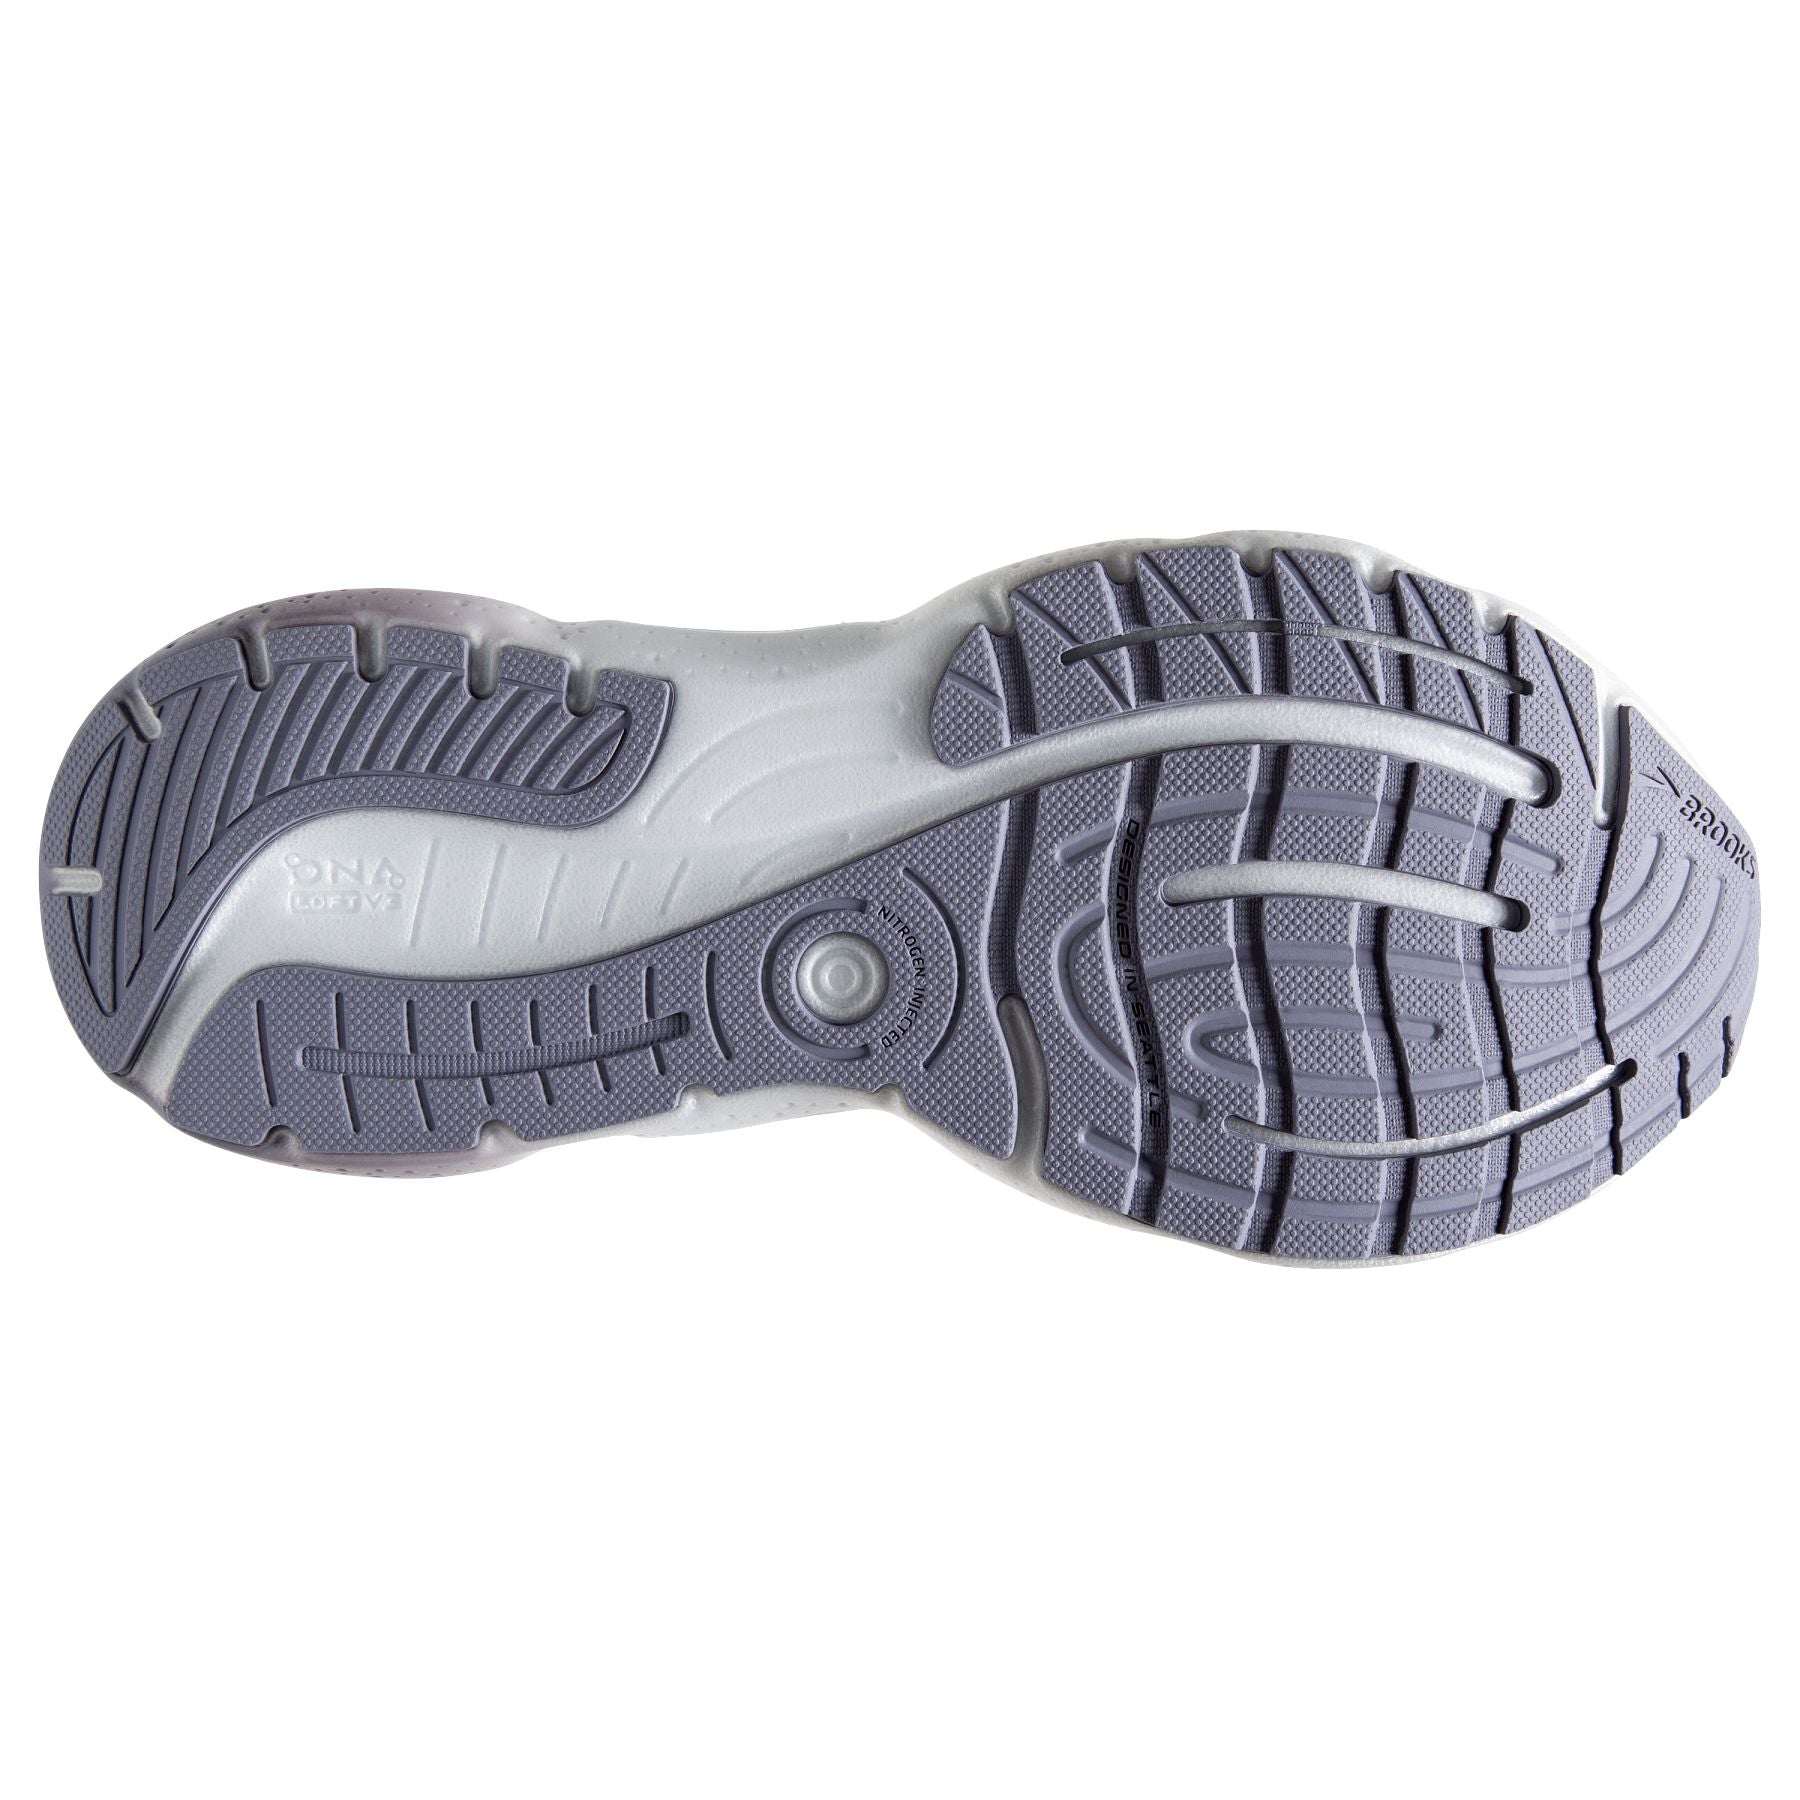 Bottom (outer sole) view of the Women's Glycerin 20 by Brooks in the color Lilac/Silver Bullet/Pink